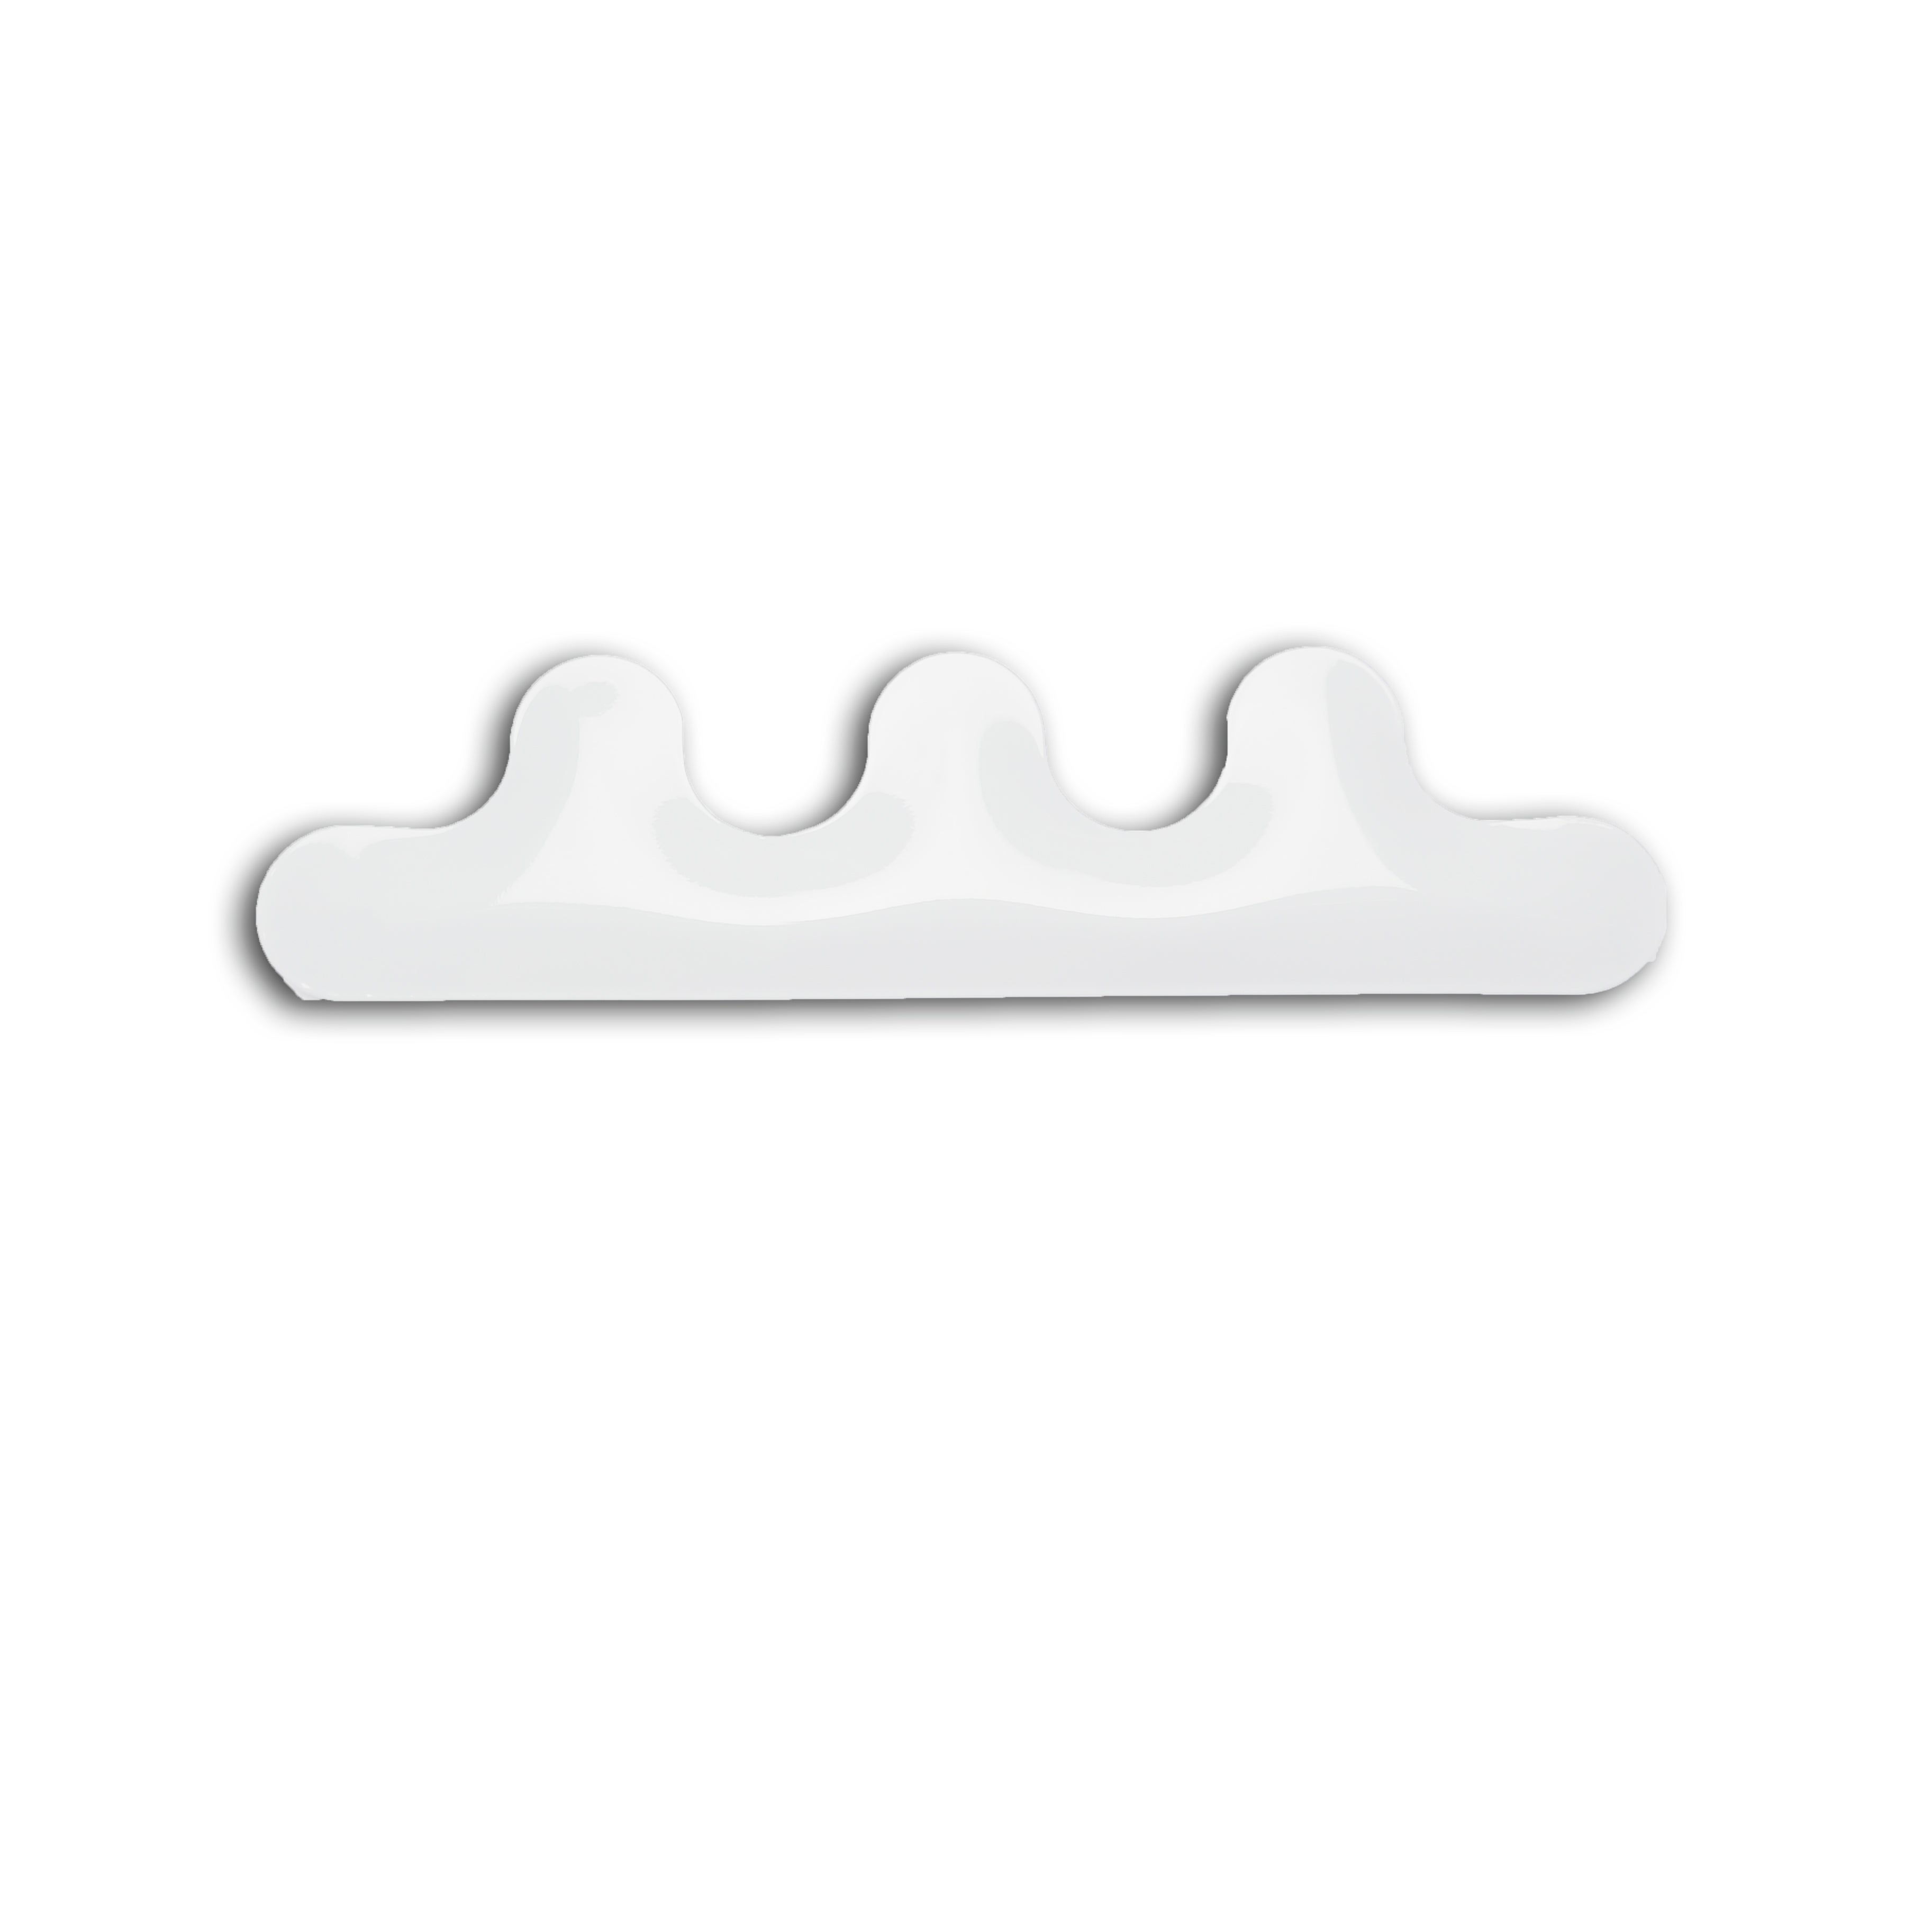 Kamm 3 Polished White Glossy Color Carbon Steel Hanger by Zieta For Sale